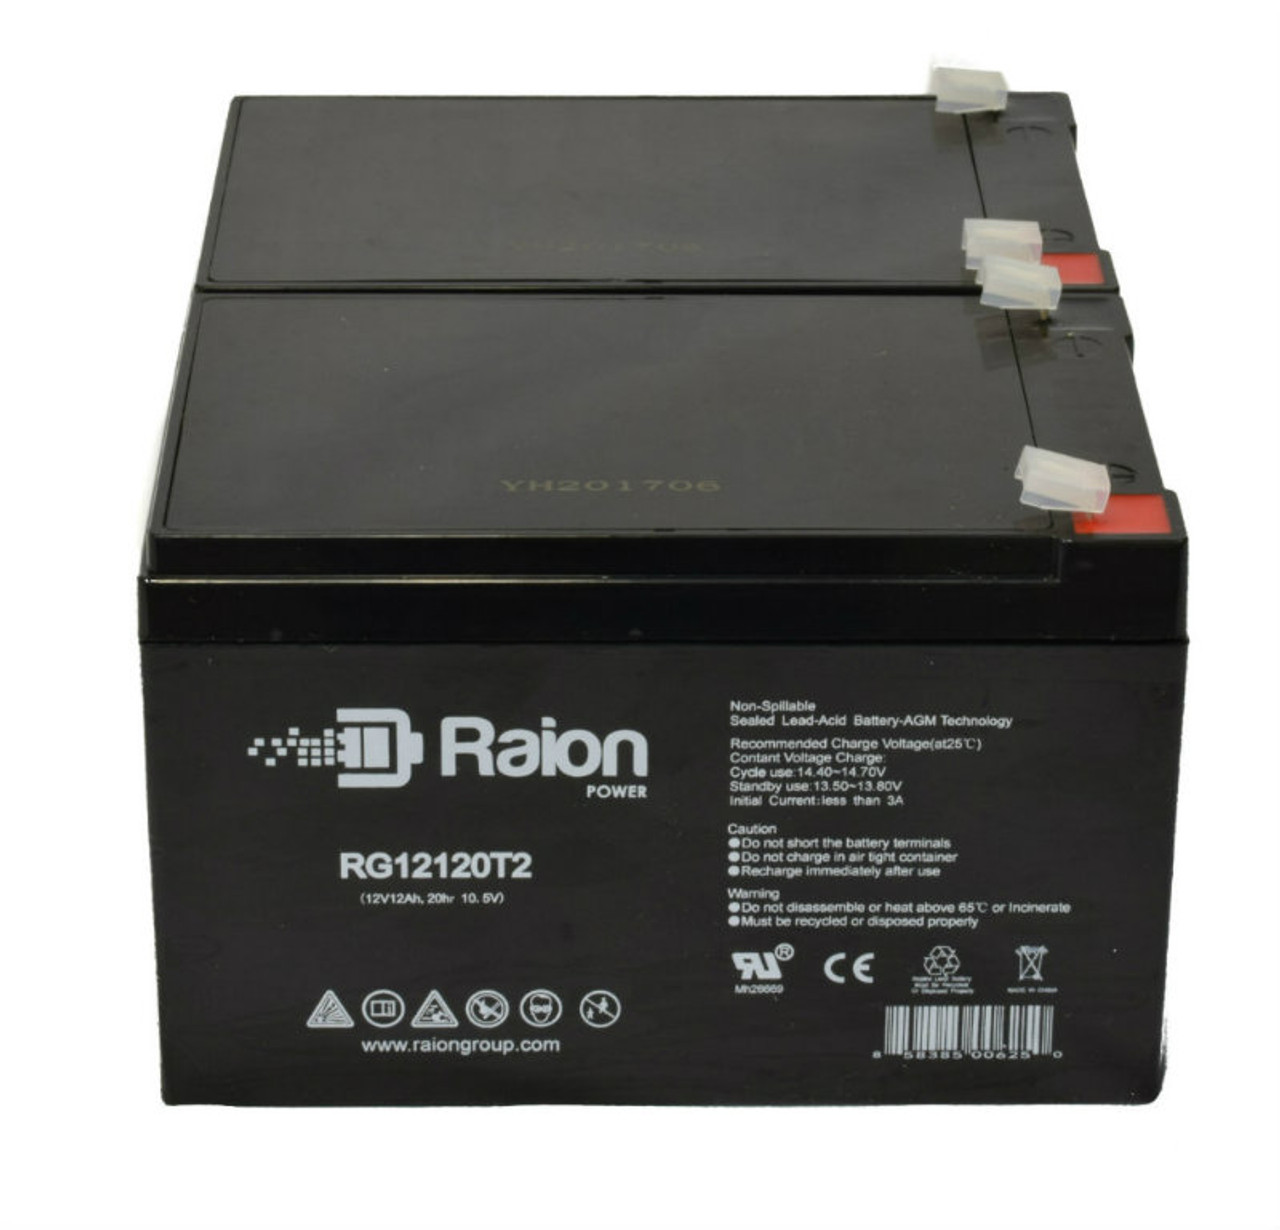 Raion Power RG12120T2 Replacement Emergency Light Battery for Sonnenschein A512/10 S - 2 Pack